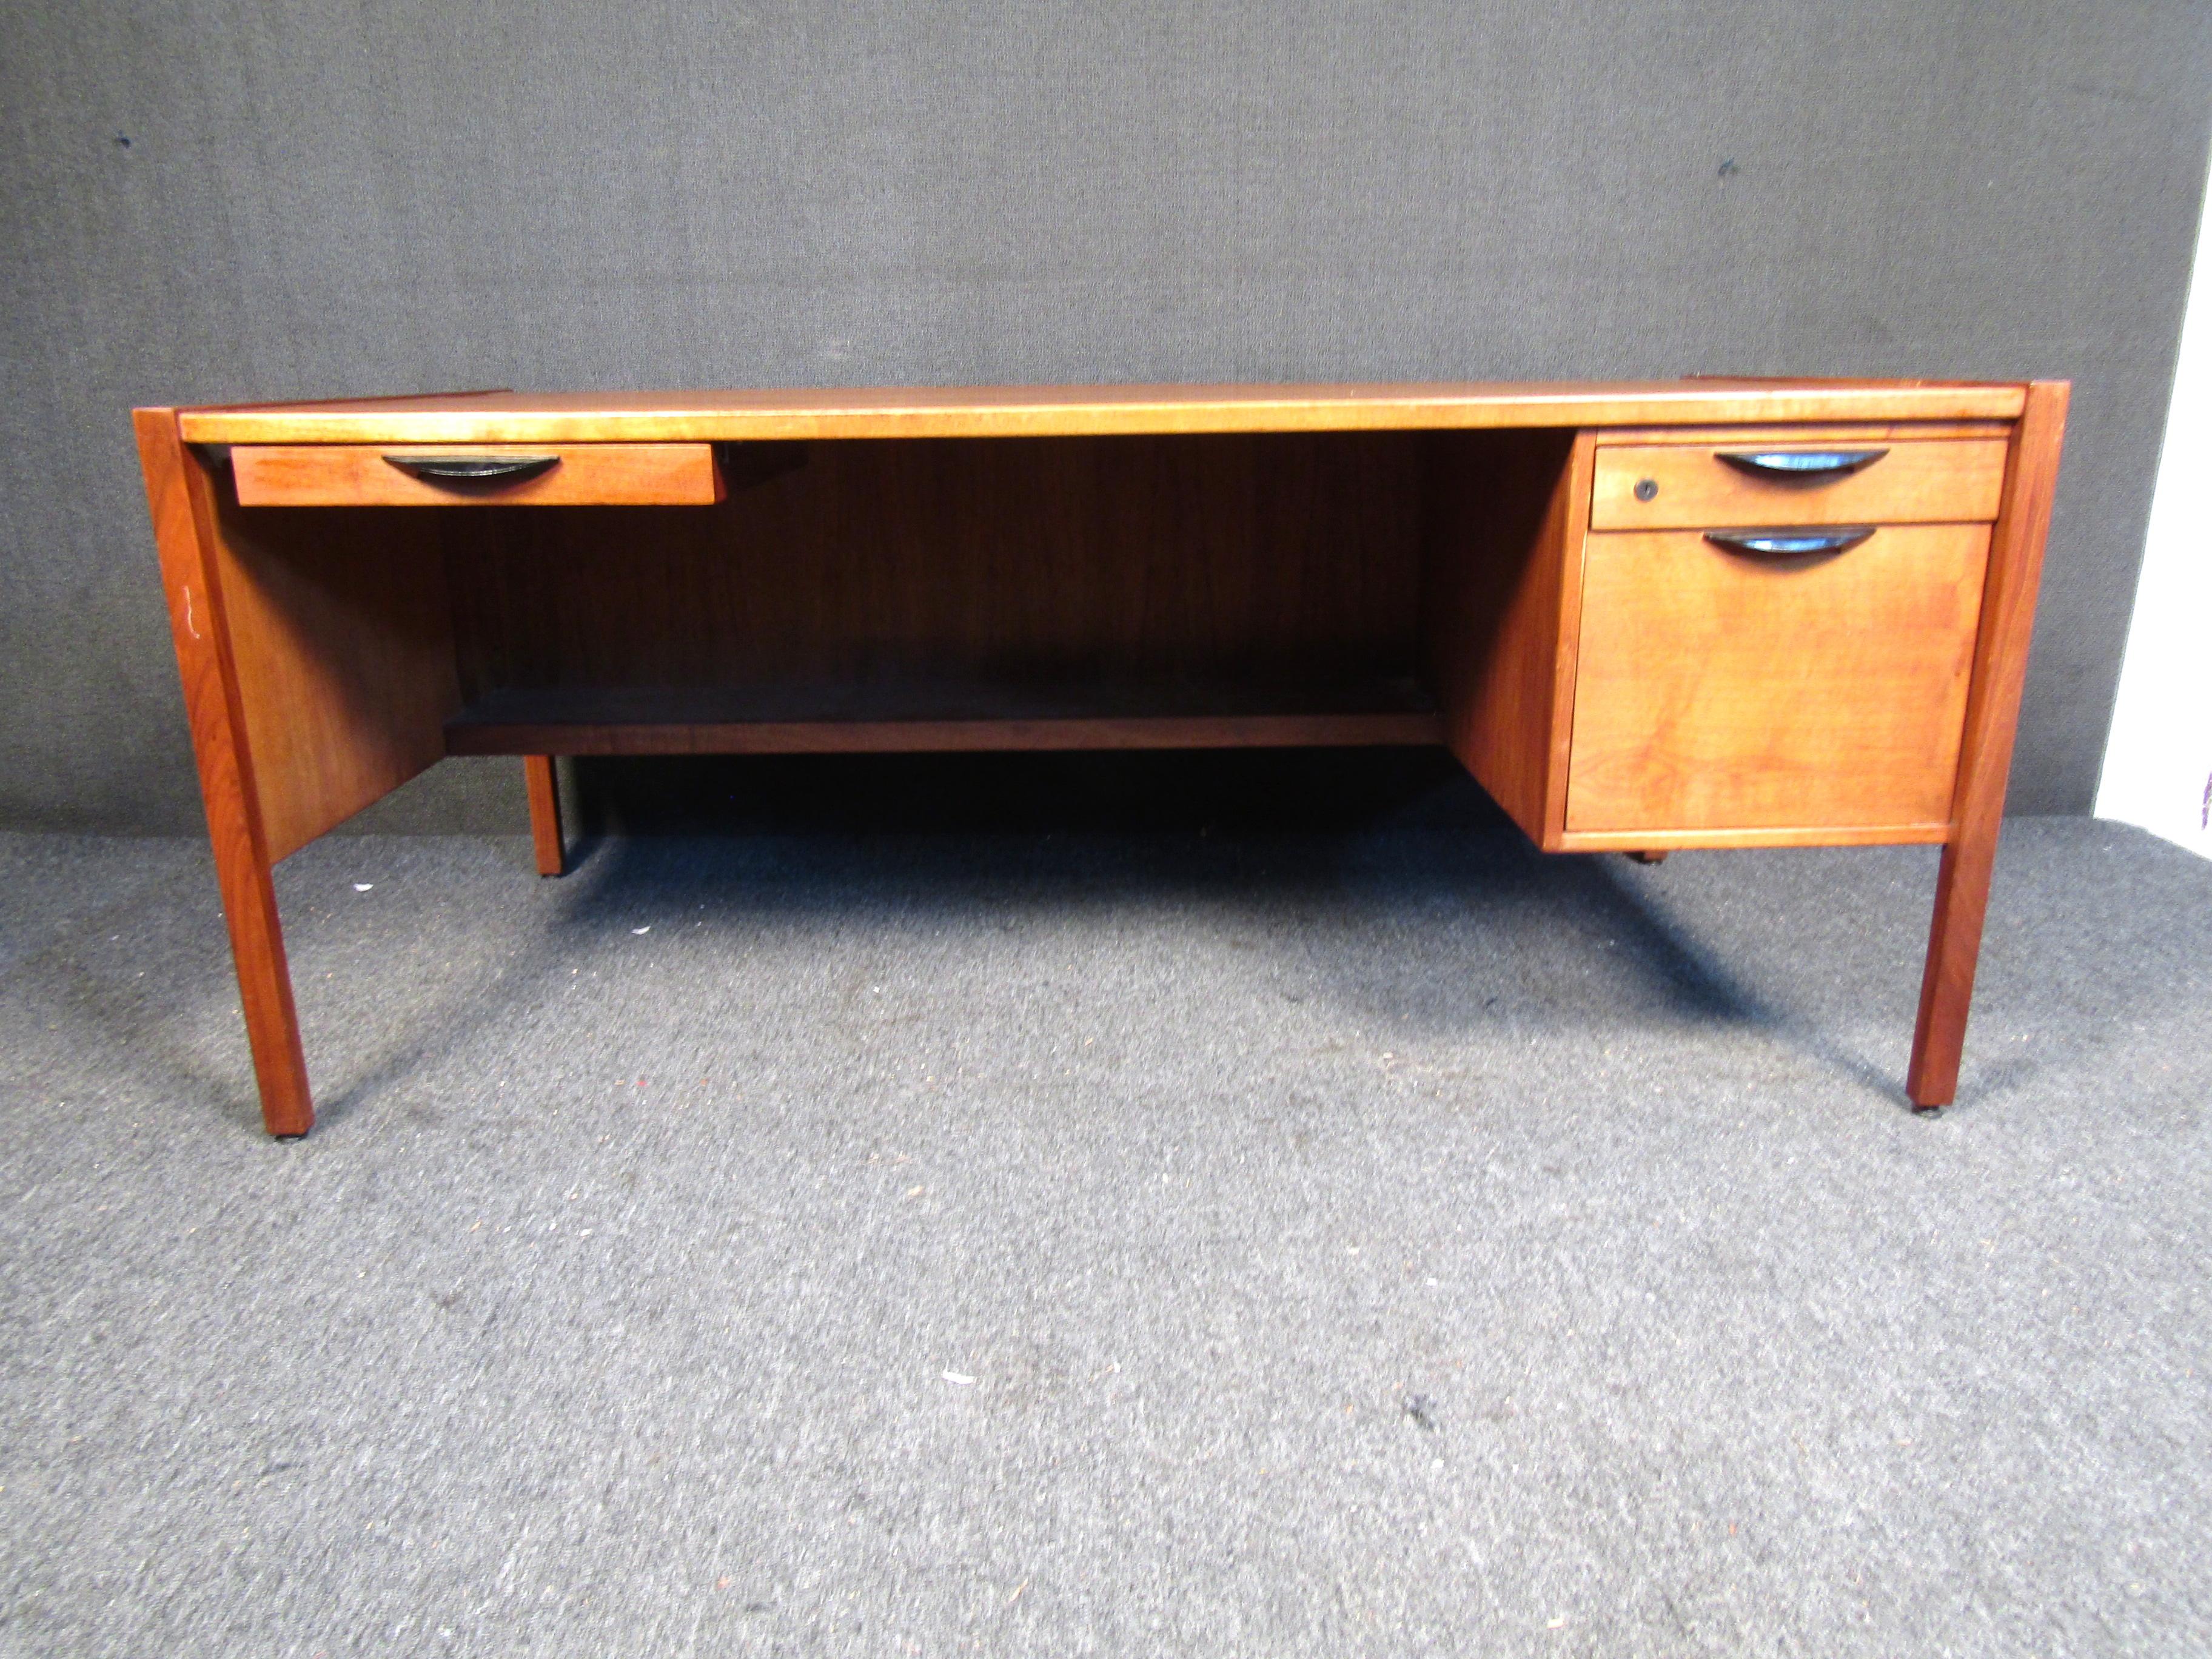 Mid-century modern writing desk by Harvey Probber. This desk features walnut construction, ample leg room, and three drawers for storage of files and odds and ends. A beautiful vintage piece that would add subtle sophistication to any work